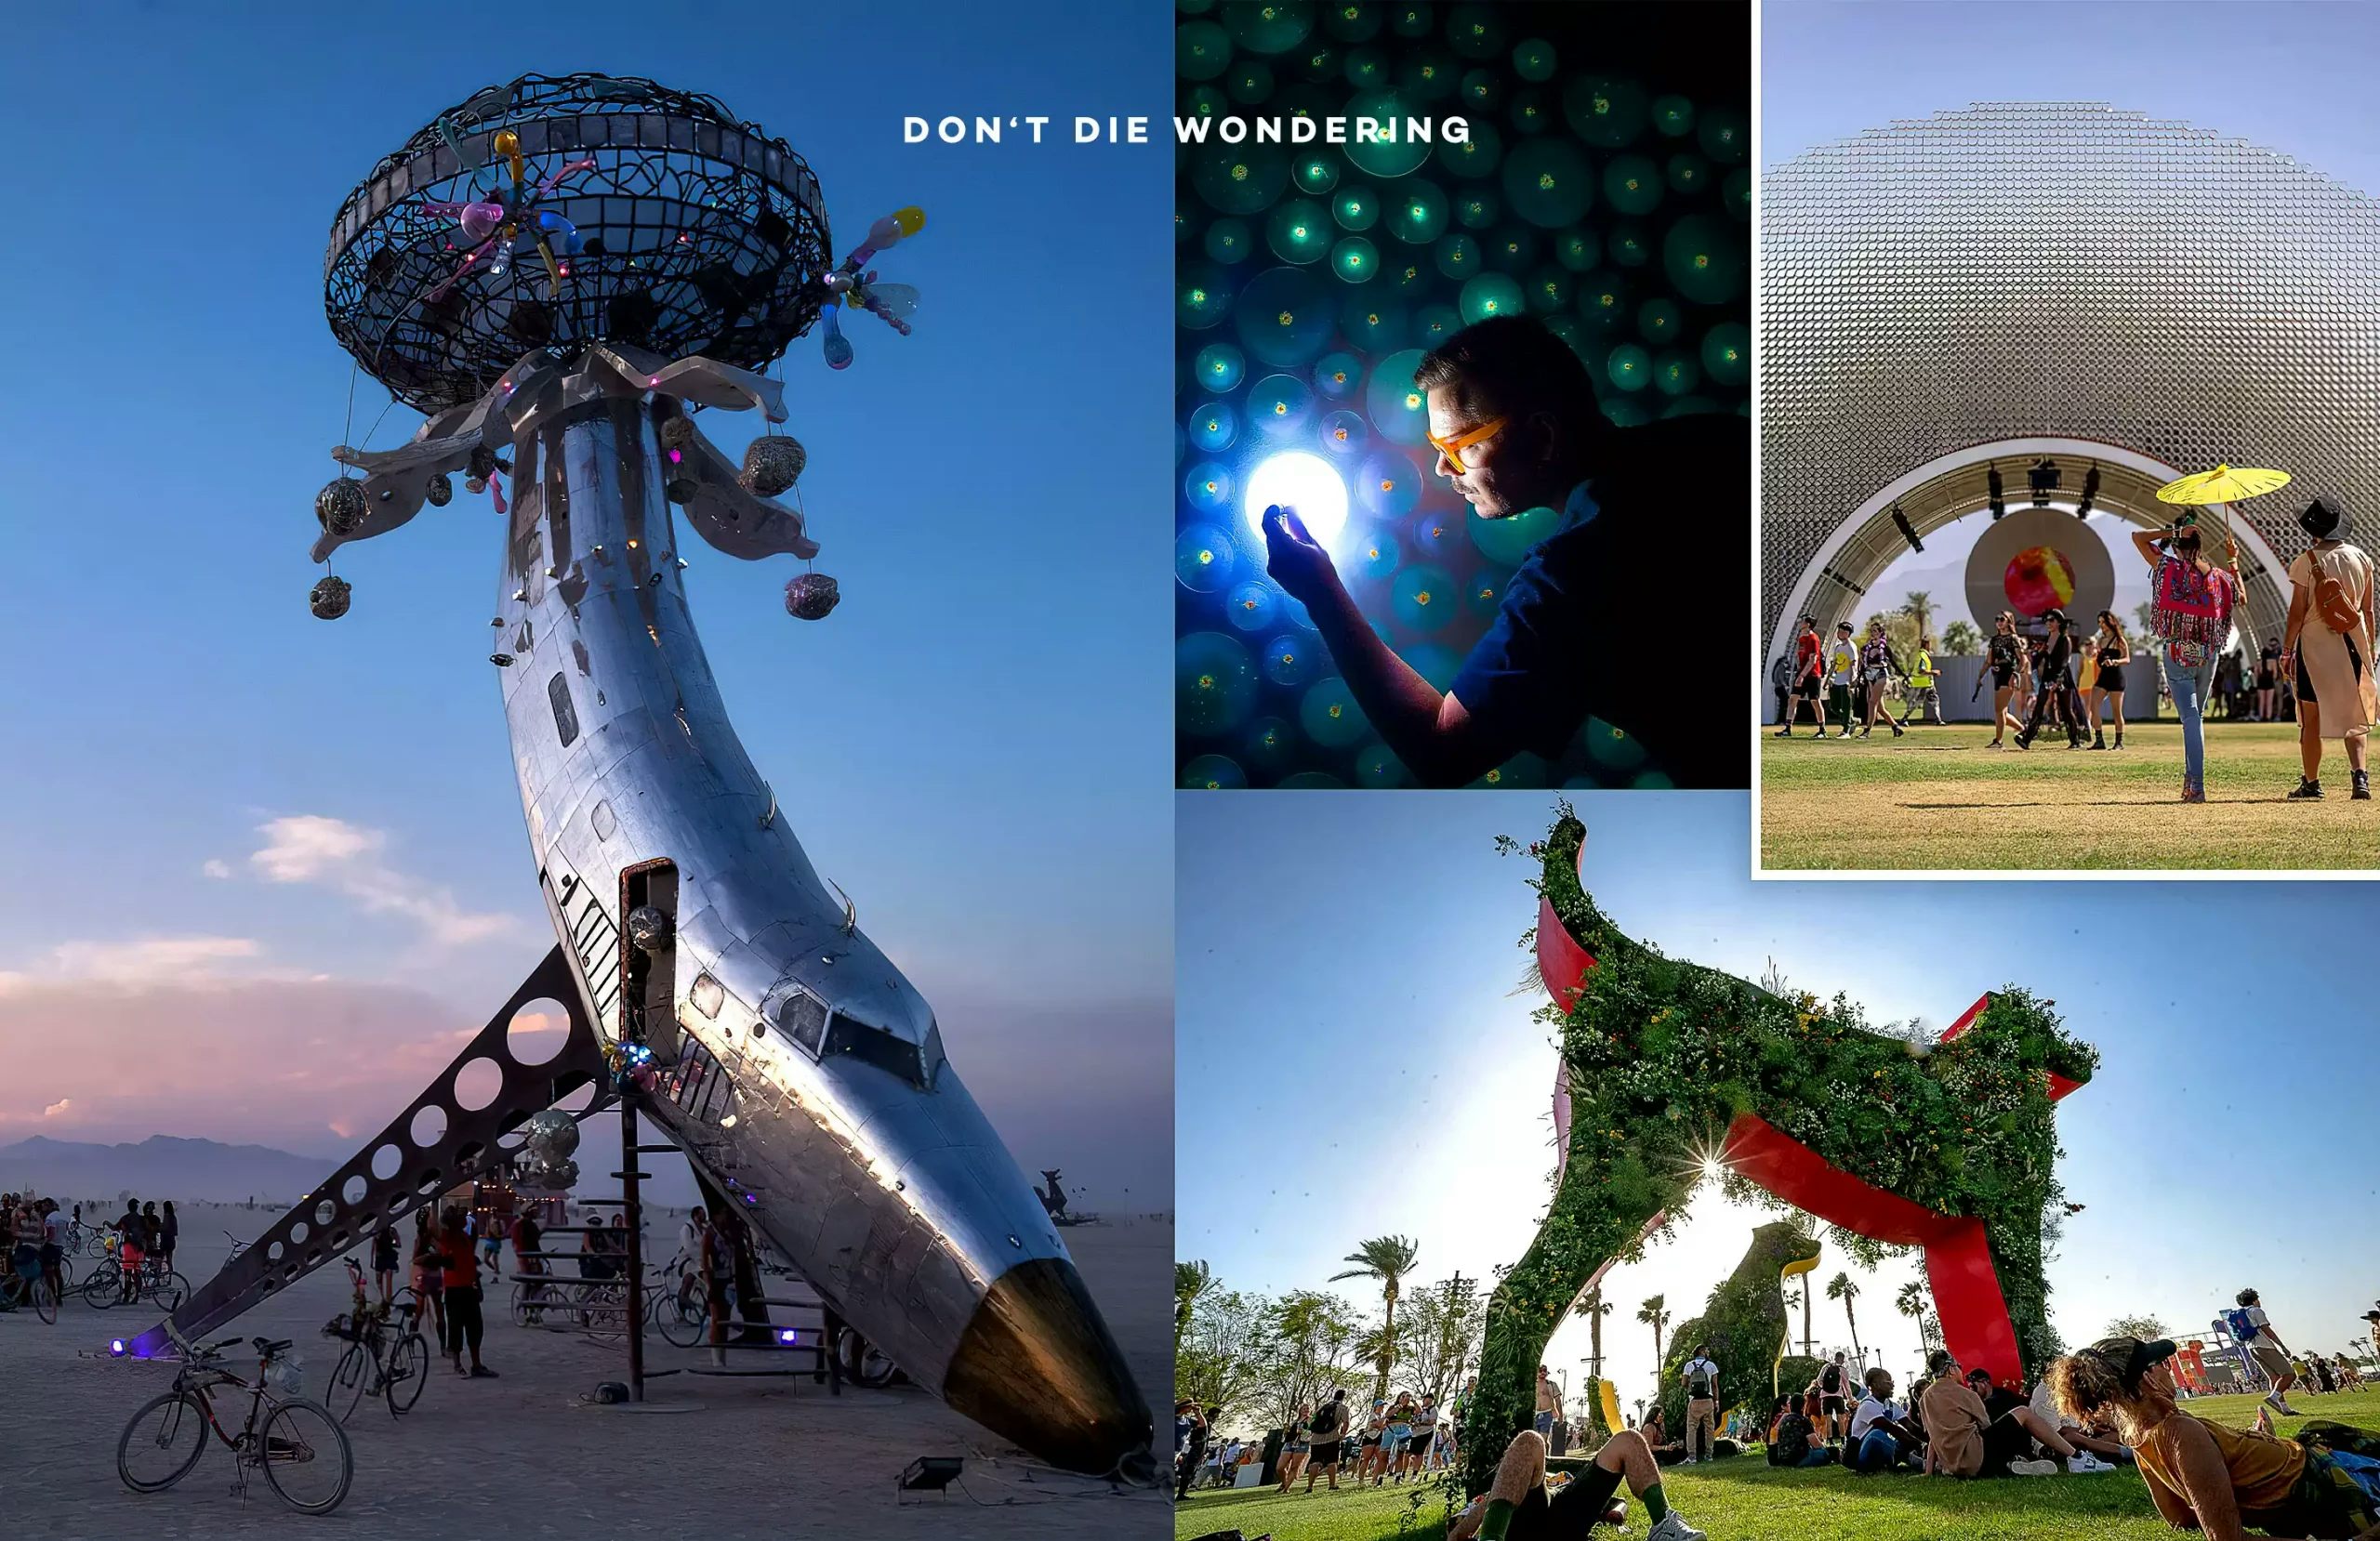 Who Are The Visual Artists Creating Works for Coachella 2022?